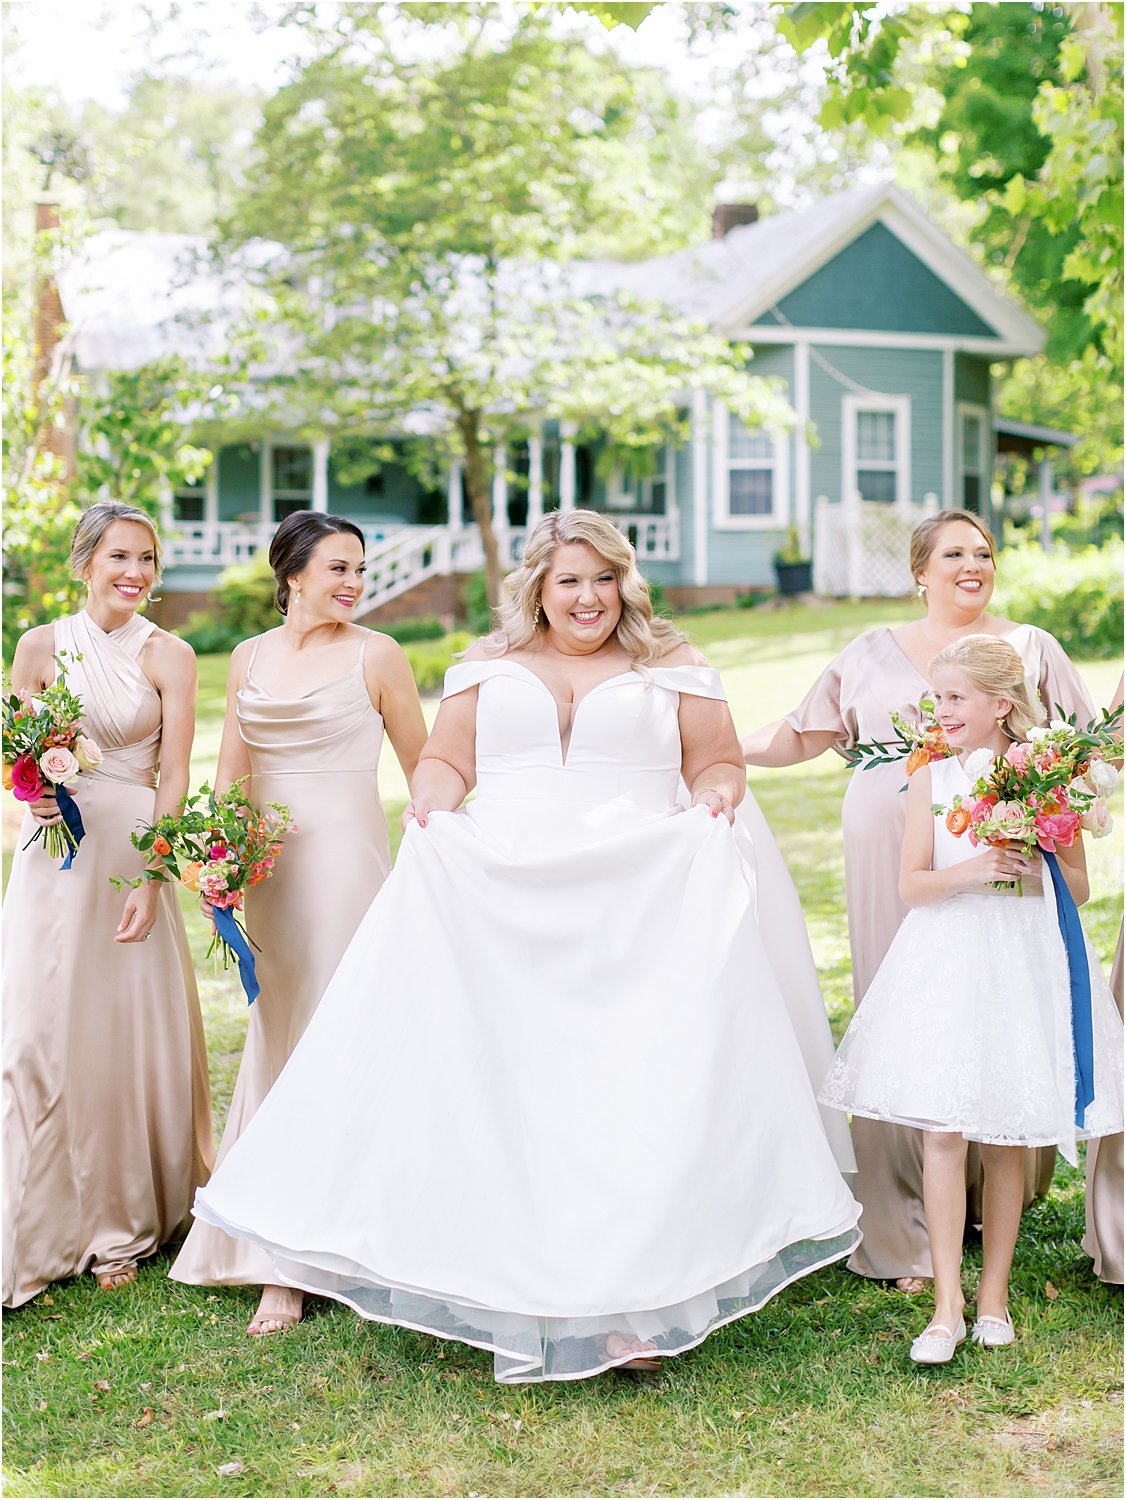 Bride and her gals - Southern Summer backyard wedding